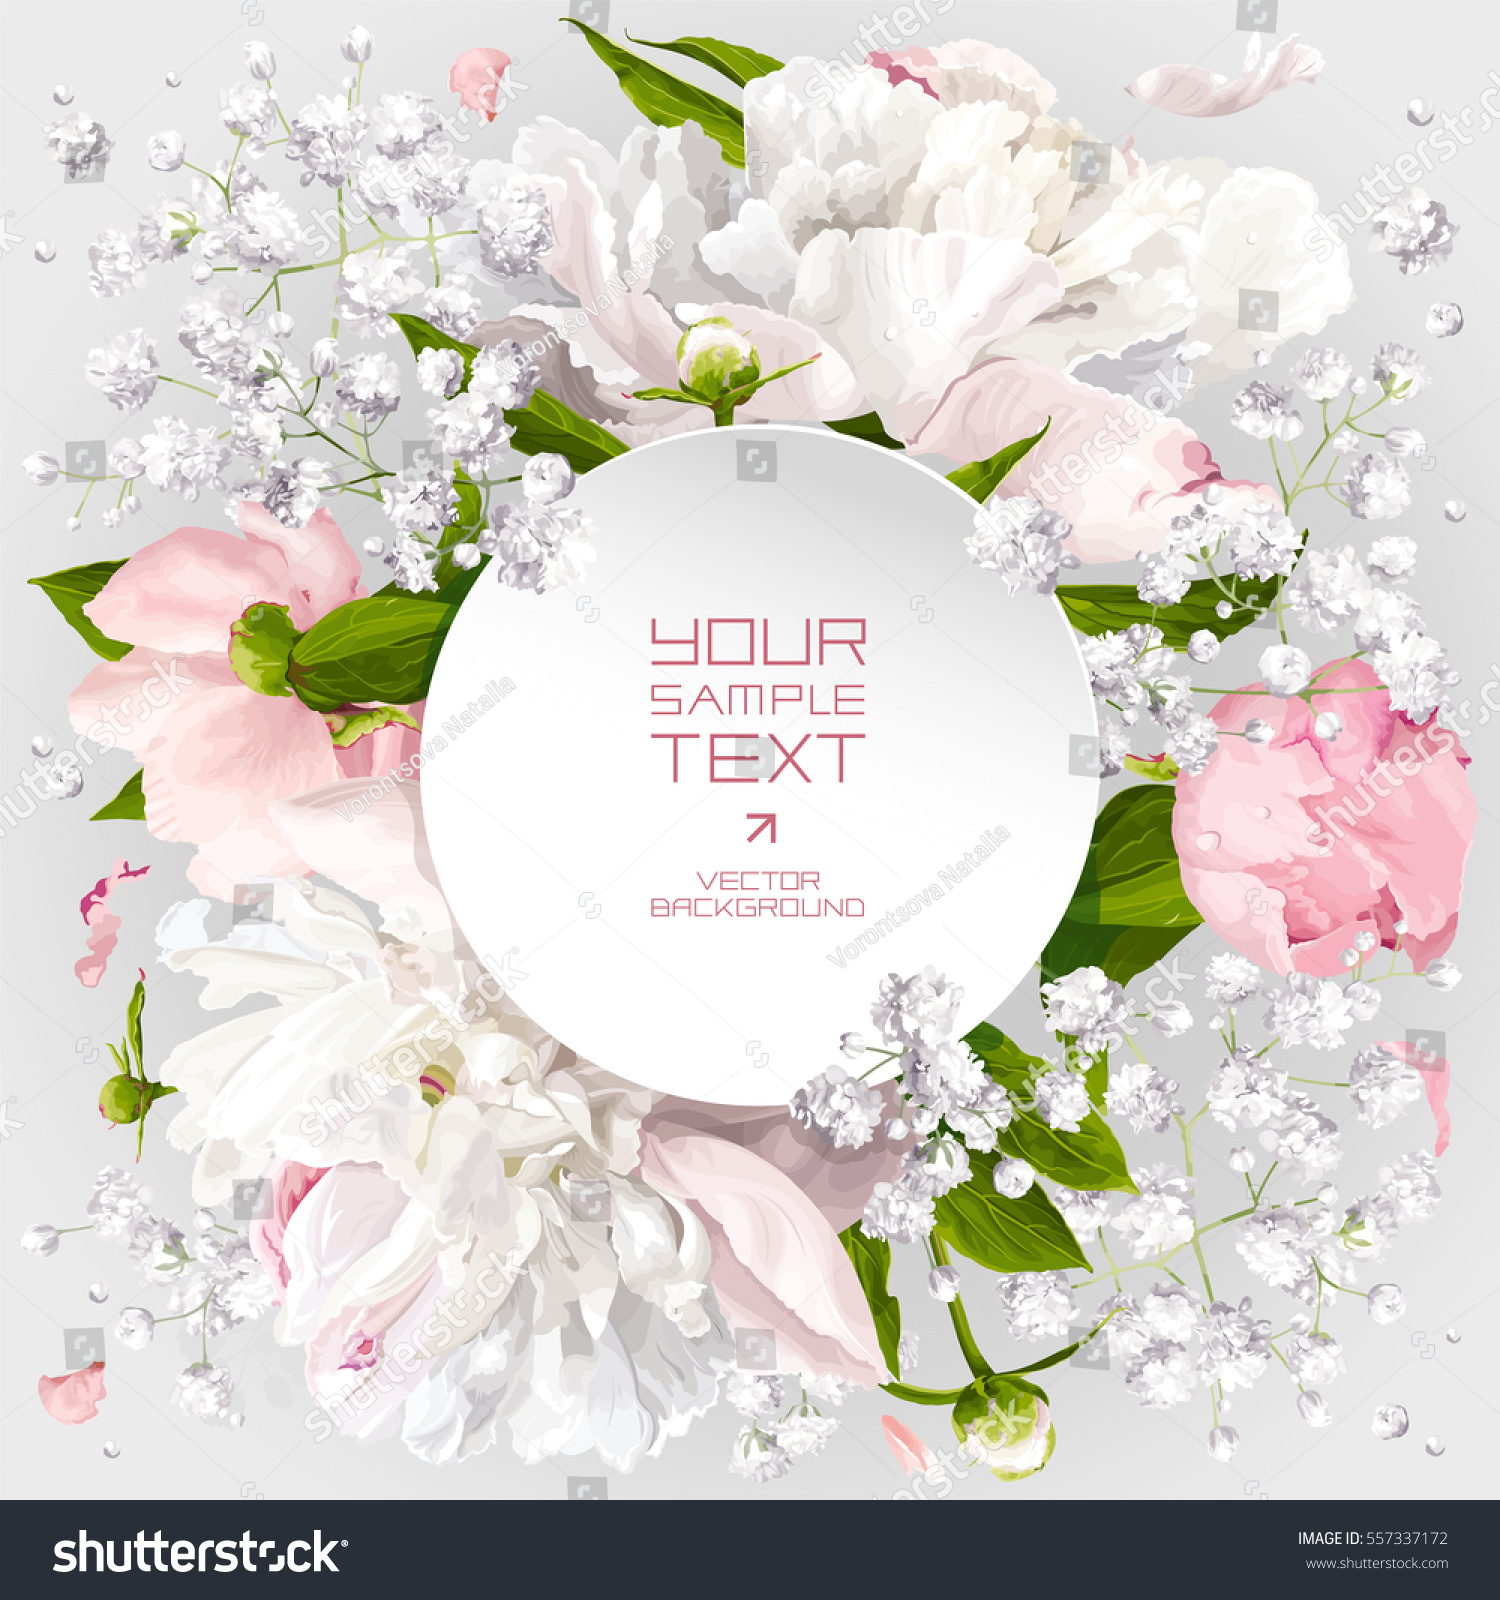 Romantic flower invitation or greeting card for wedding decoration, Valentine's Day, sales and other events with little white flowers and round paper label. #557337172